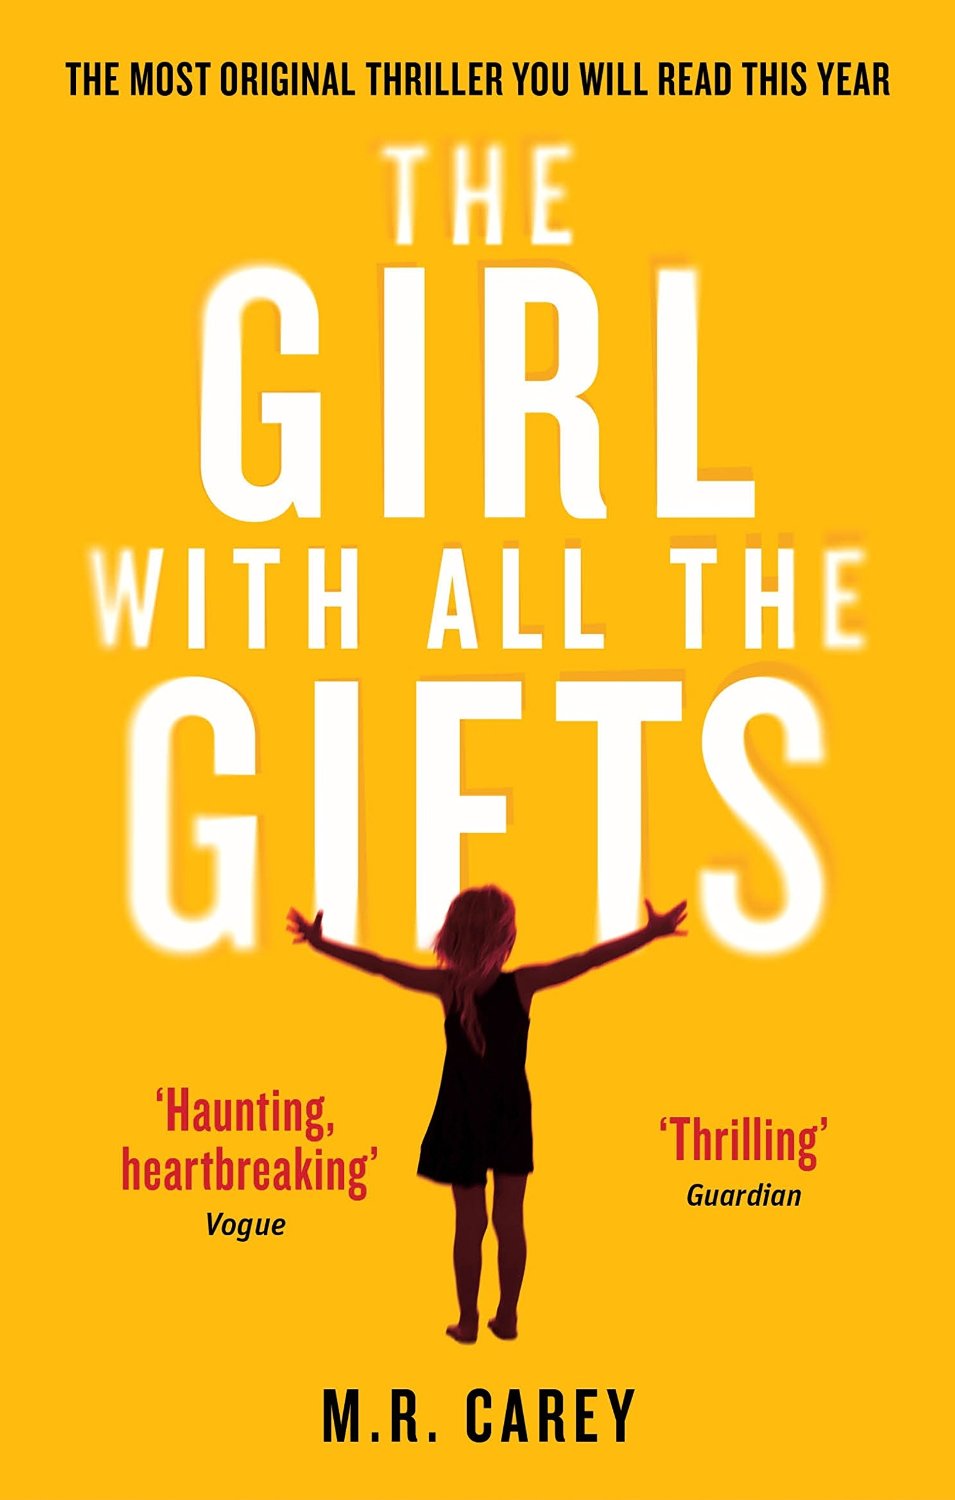 Geek insider, geekinsider, geekinsider. Com,, 'the girl with all the gifts' book review, entertainment, comics, lady geek